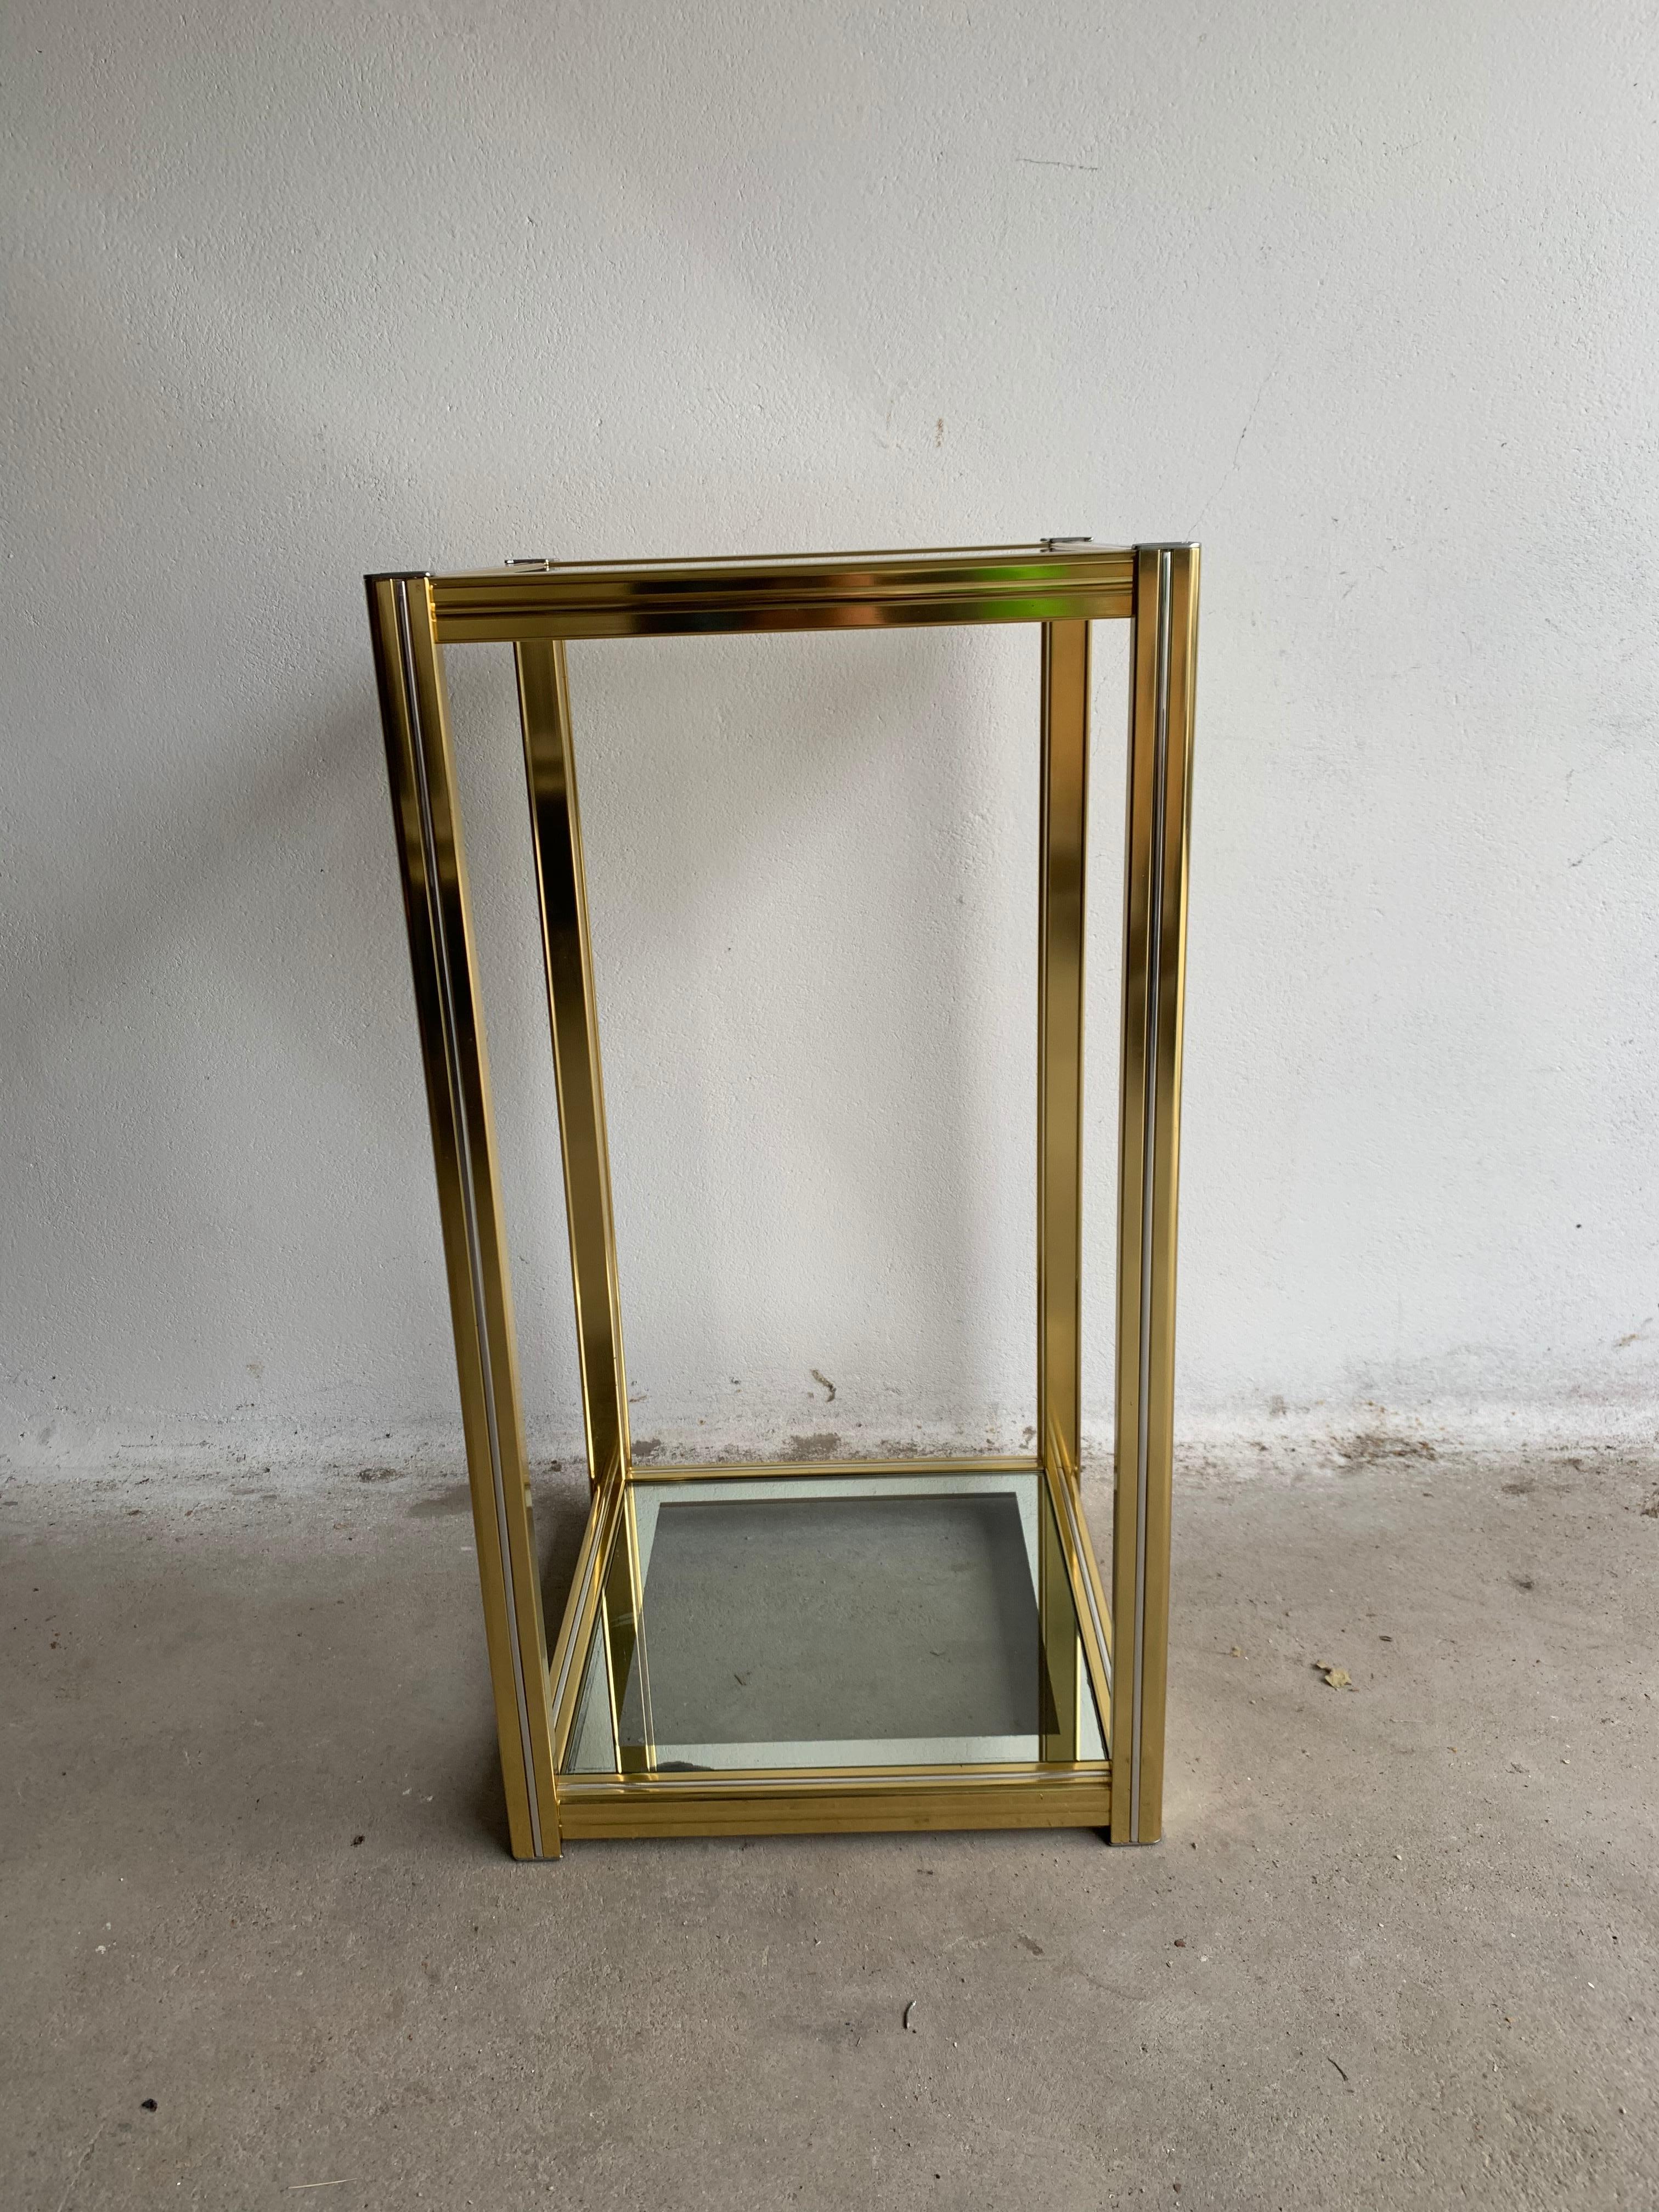 Vintage side table reminiscent of the designs by Pierre Vandel. Made of high-quality gold-plated aluminum with mirror edges on the glass tiers. Hollywood Regency style. Pierer Vandel is best known for his angular tables, which exude the glamorous